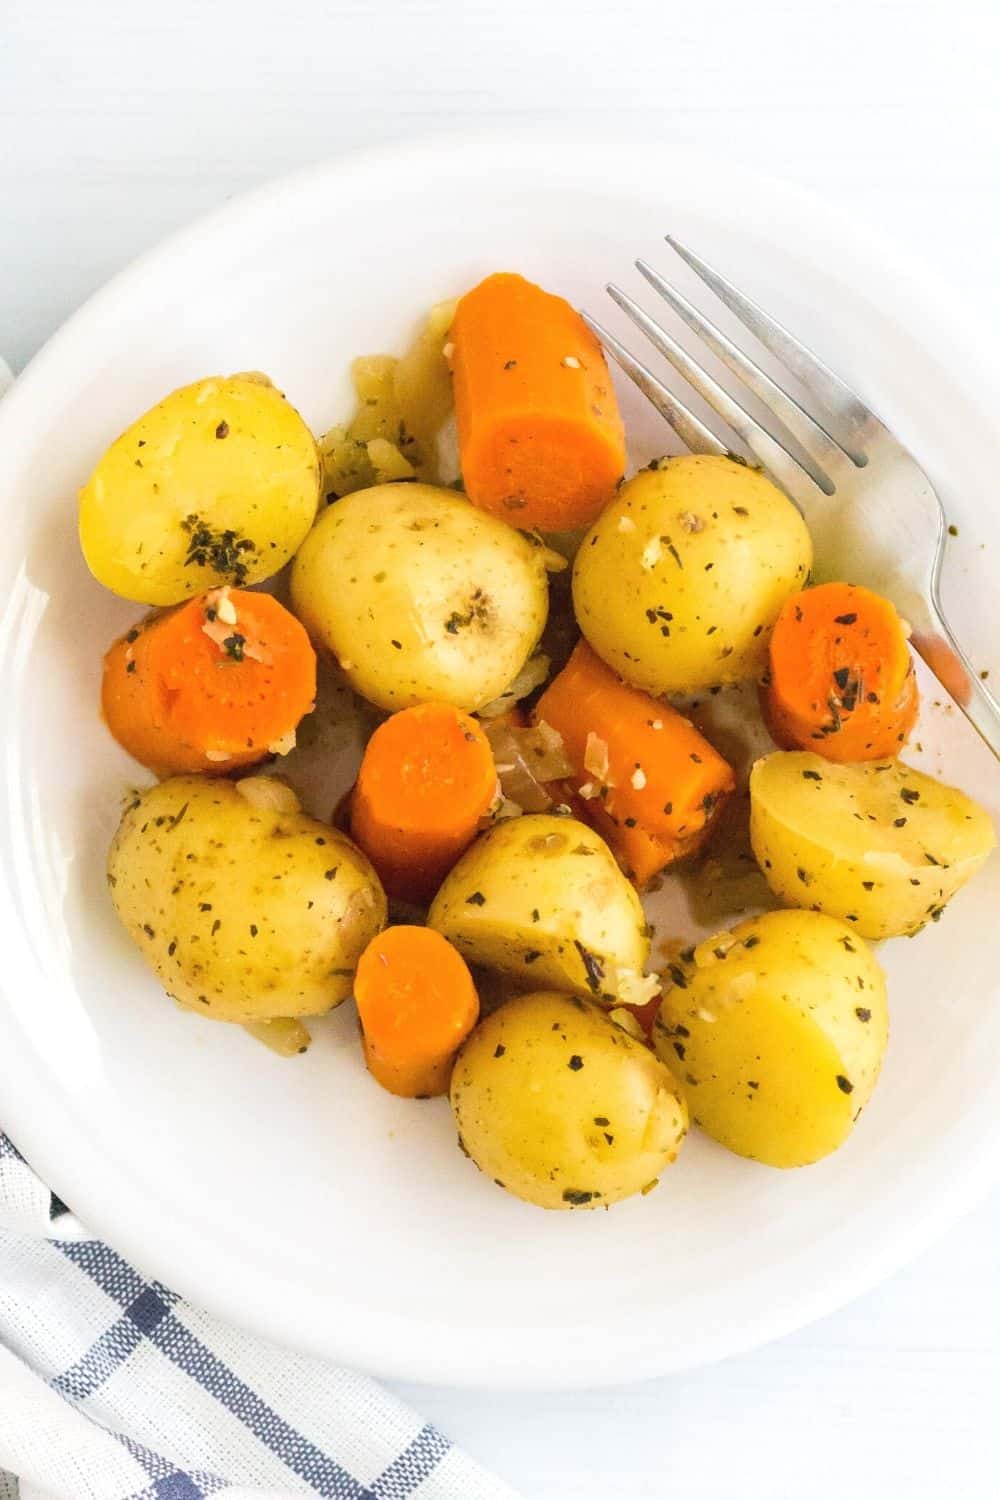 overhead view of a helping of pressure cooker potatoes and carrots on a white plate, with a fork next to the vegetables